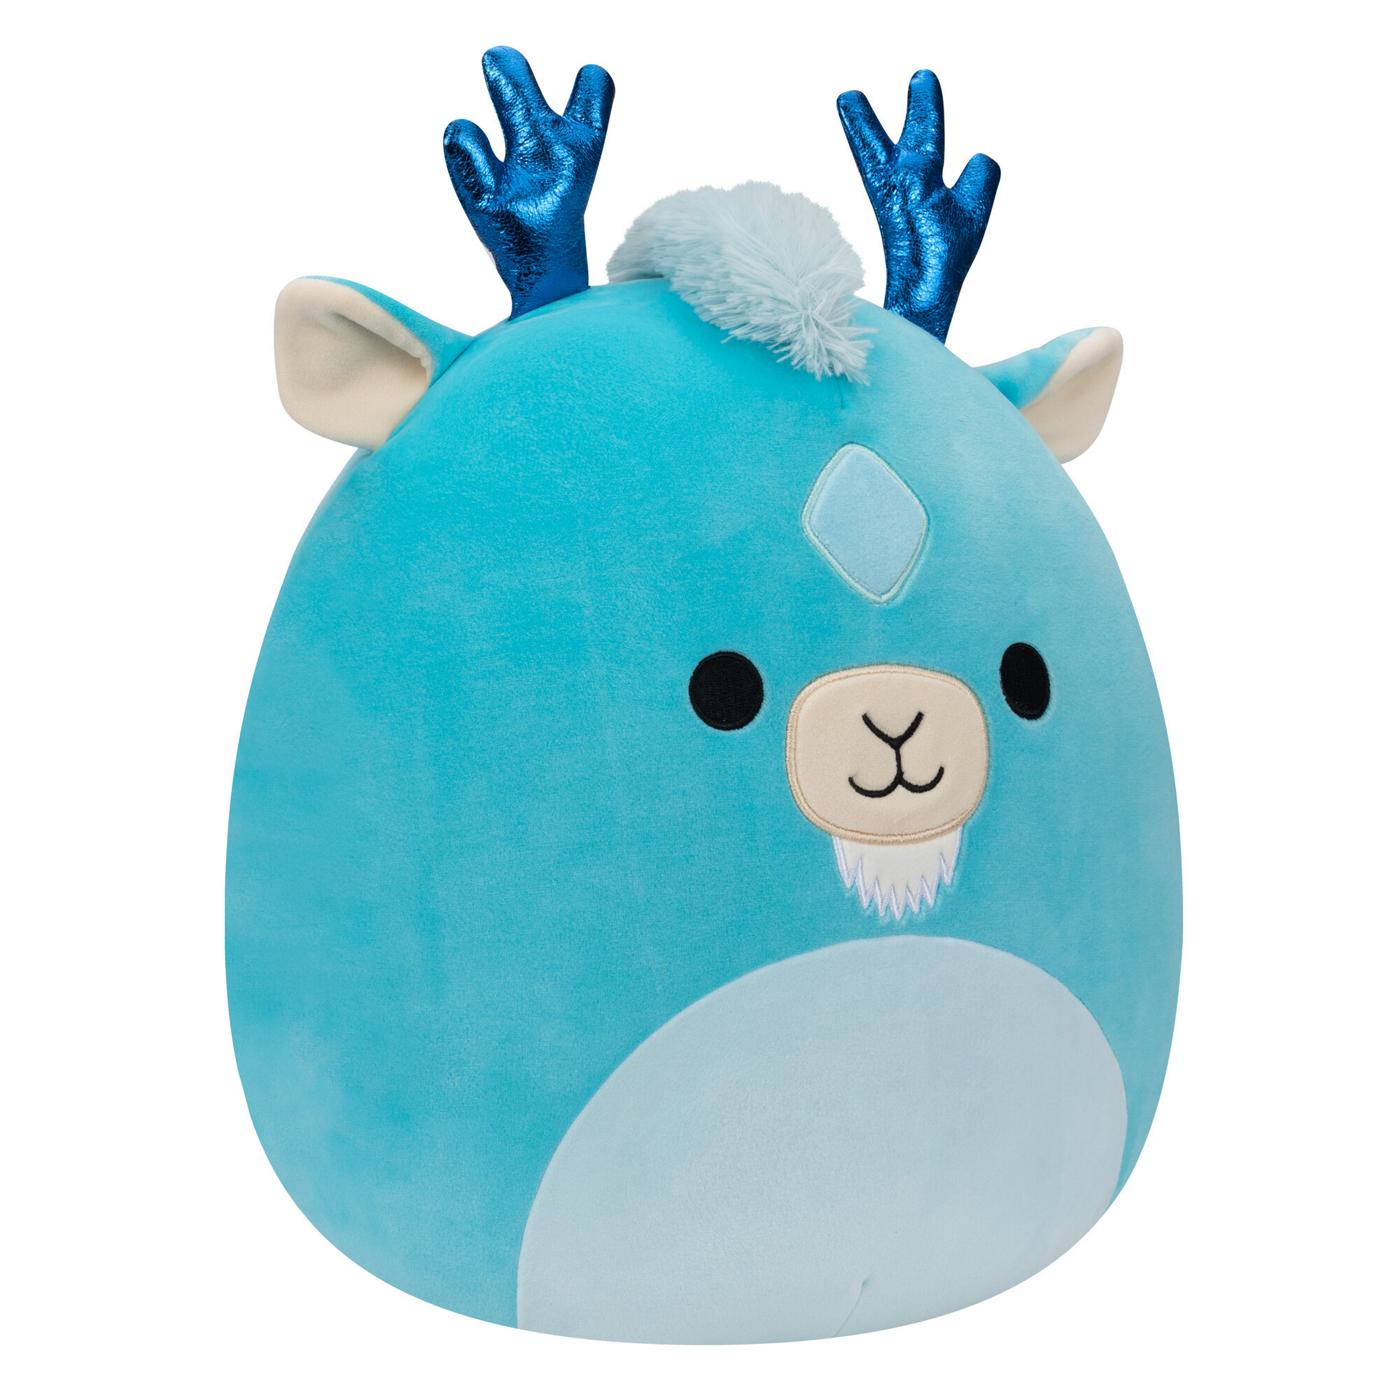 Squishmallows Reindeer Plush - Blue; image 2 of 3